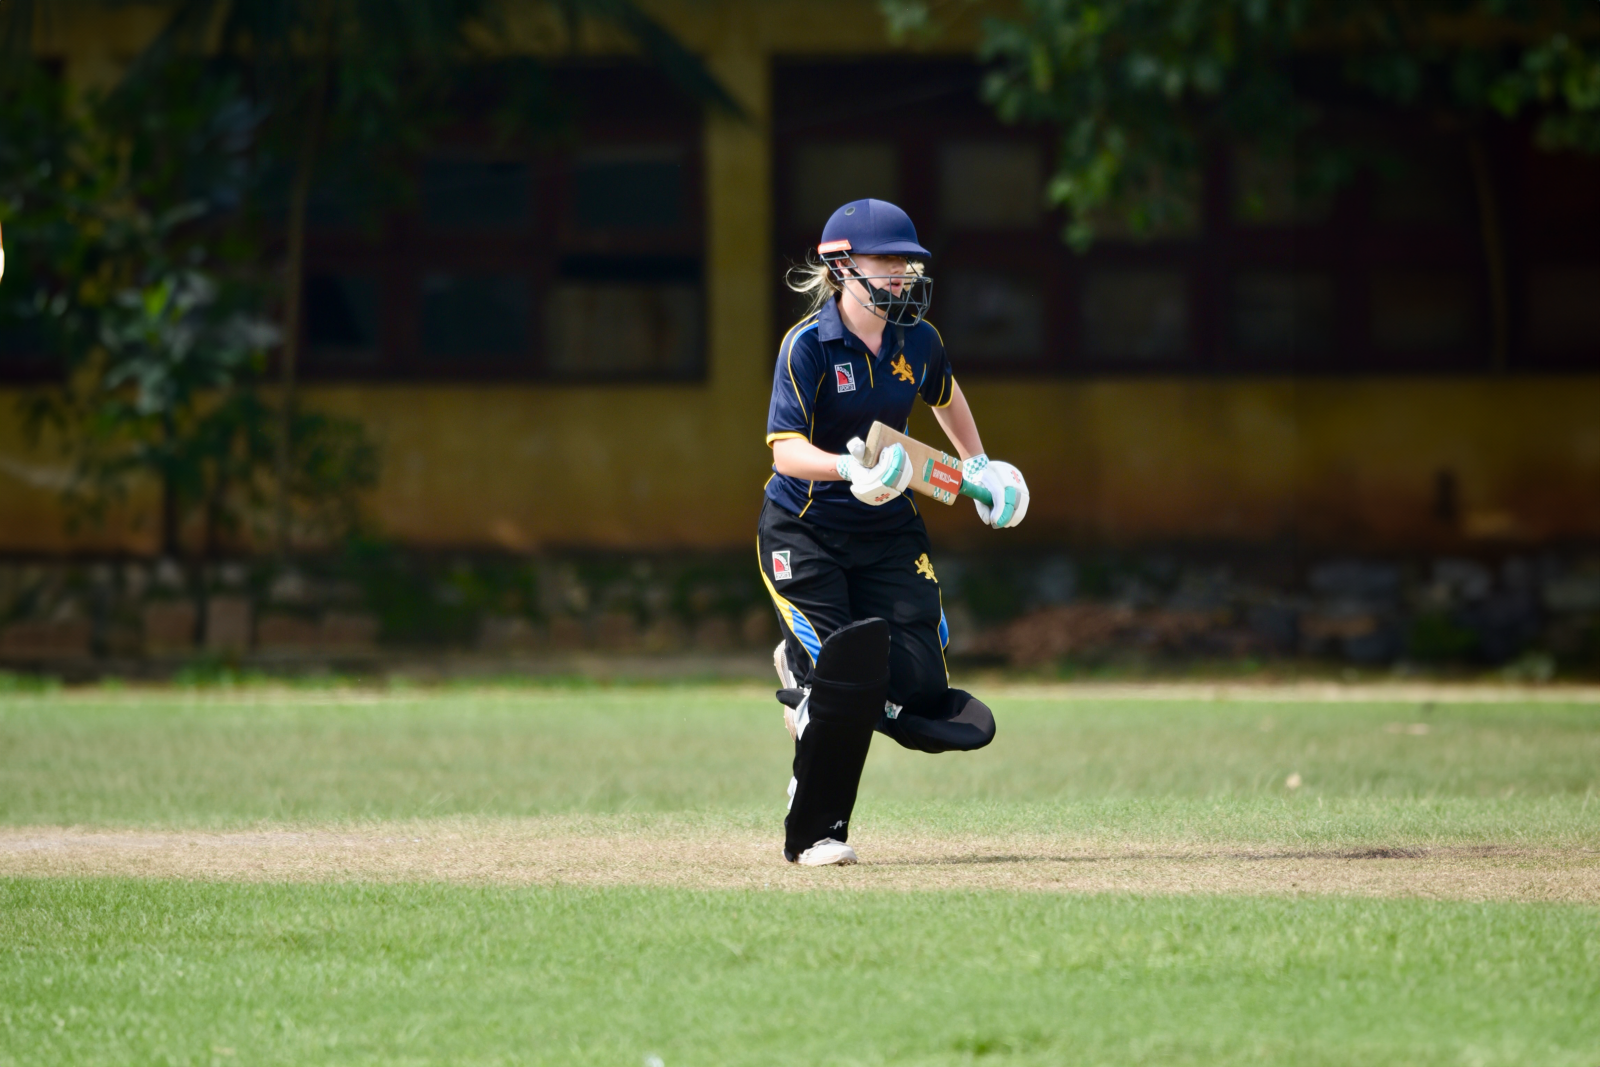 Holly Evans completes a run in the game against Mercantile Cricket Association Girls.